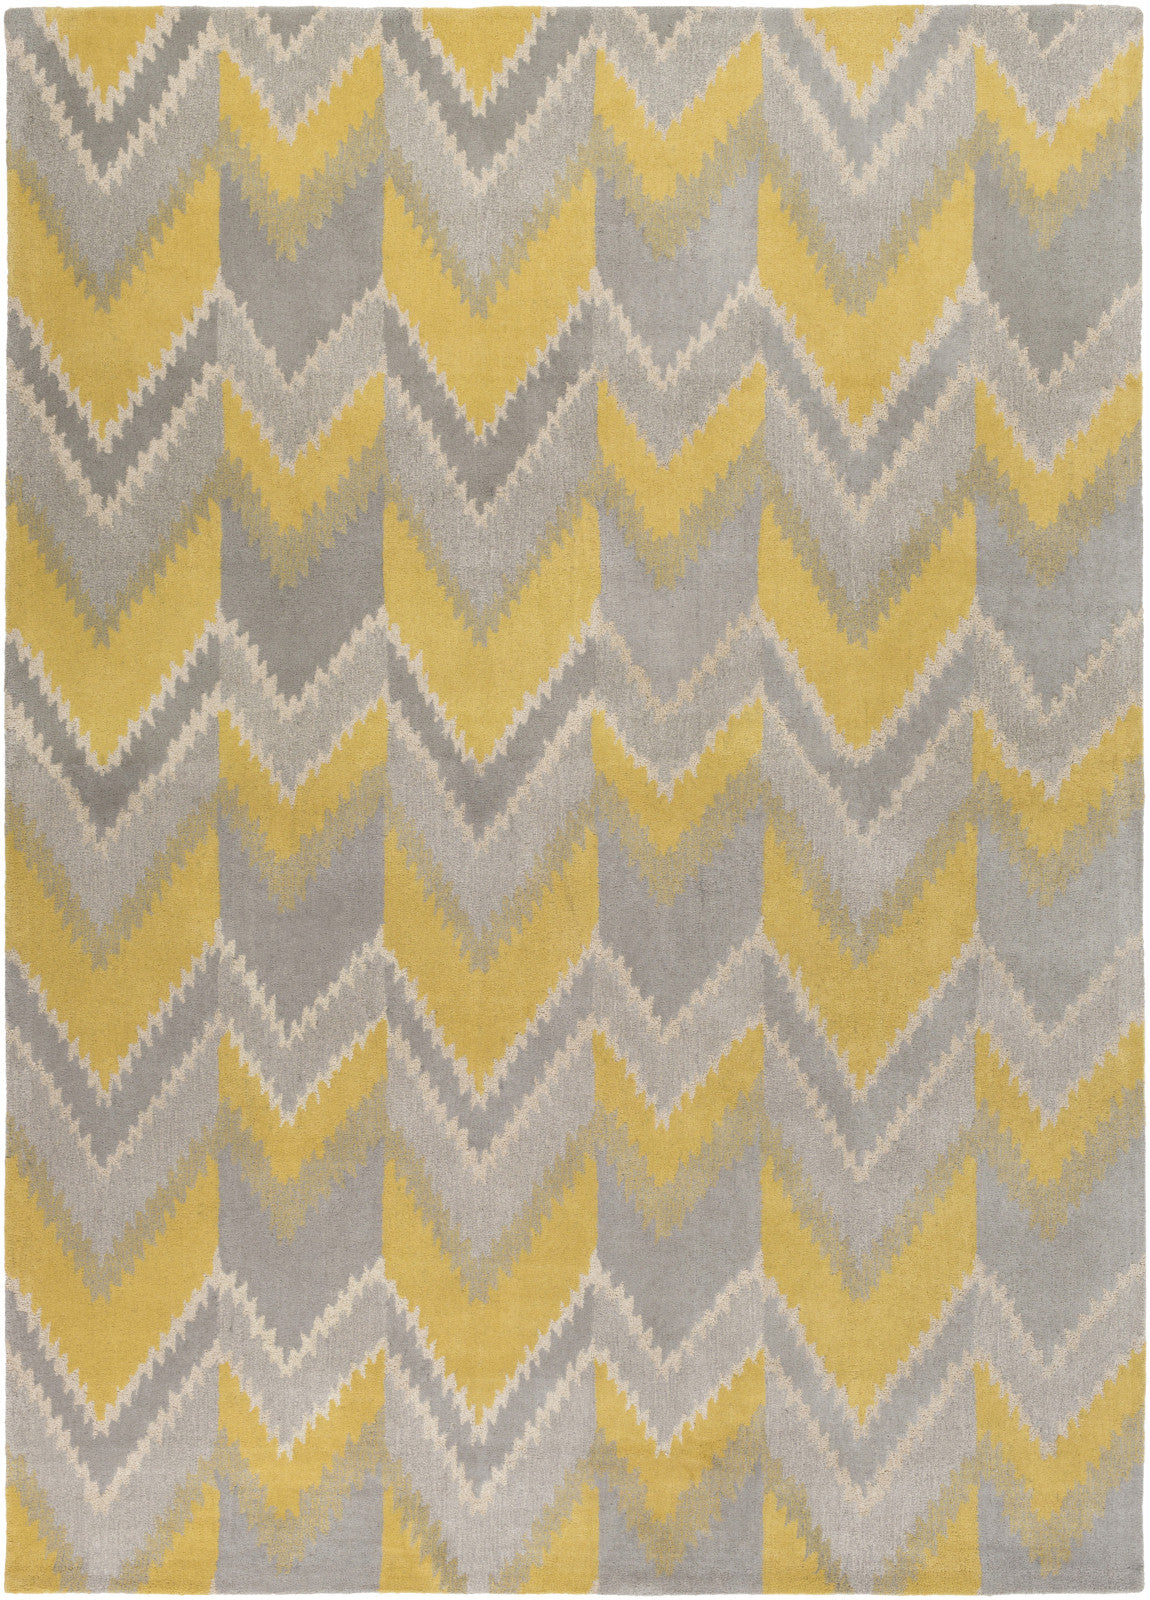 Surya Mount Perry MTP-1030 Area Rug by Florence Broadhurst main image